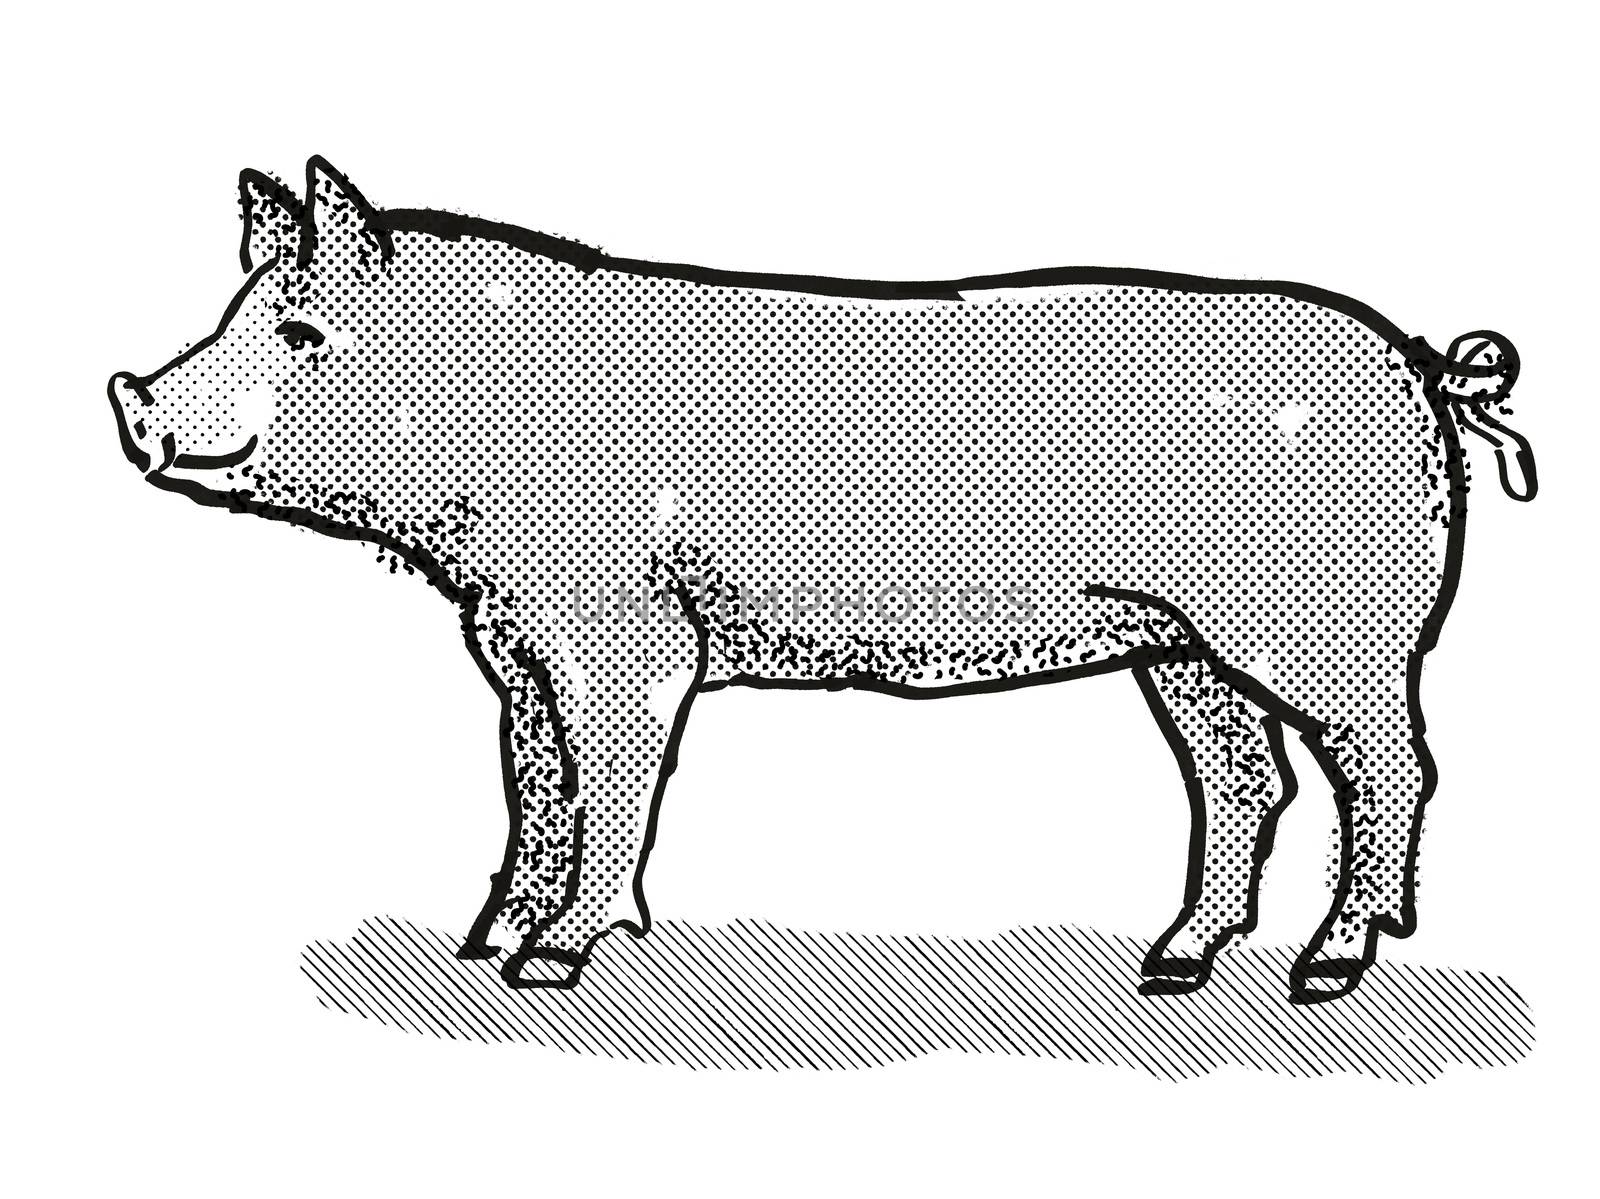 Retro cartoon style drawing of a Berkshire sow or boar, a pig breed viewed from side on isolated white background done in black and white